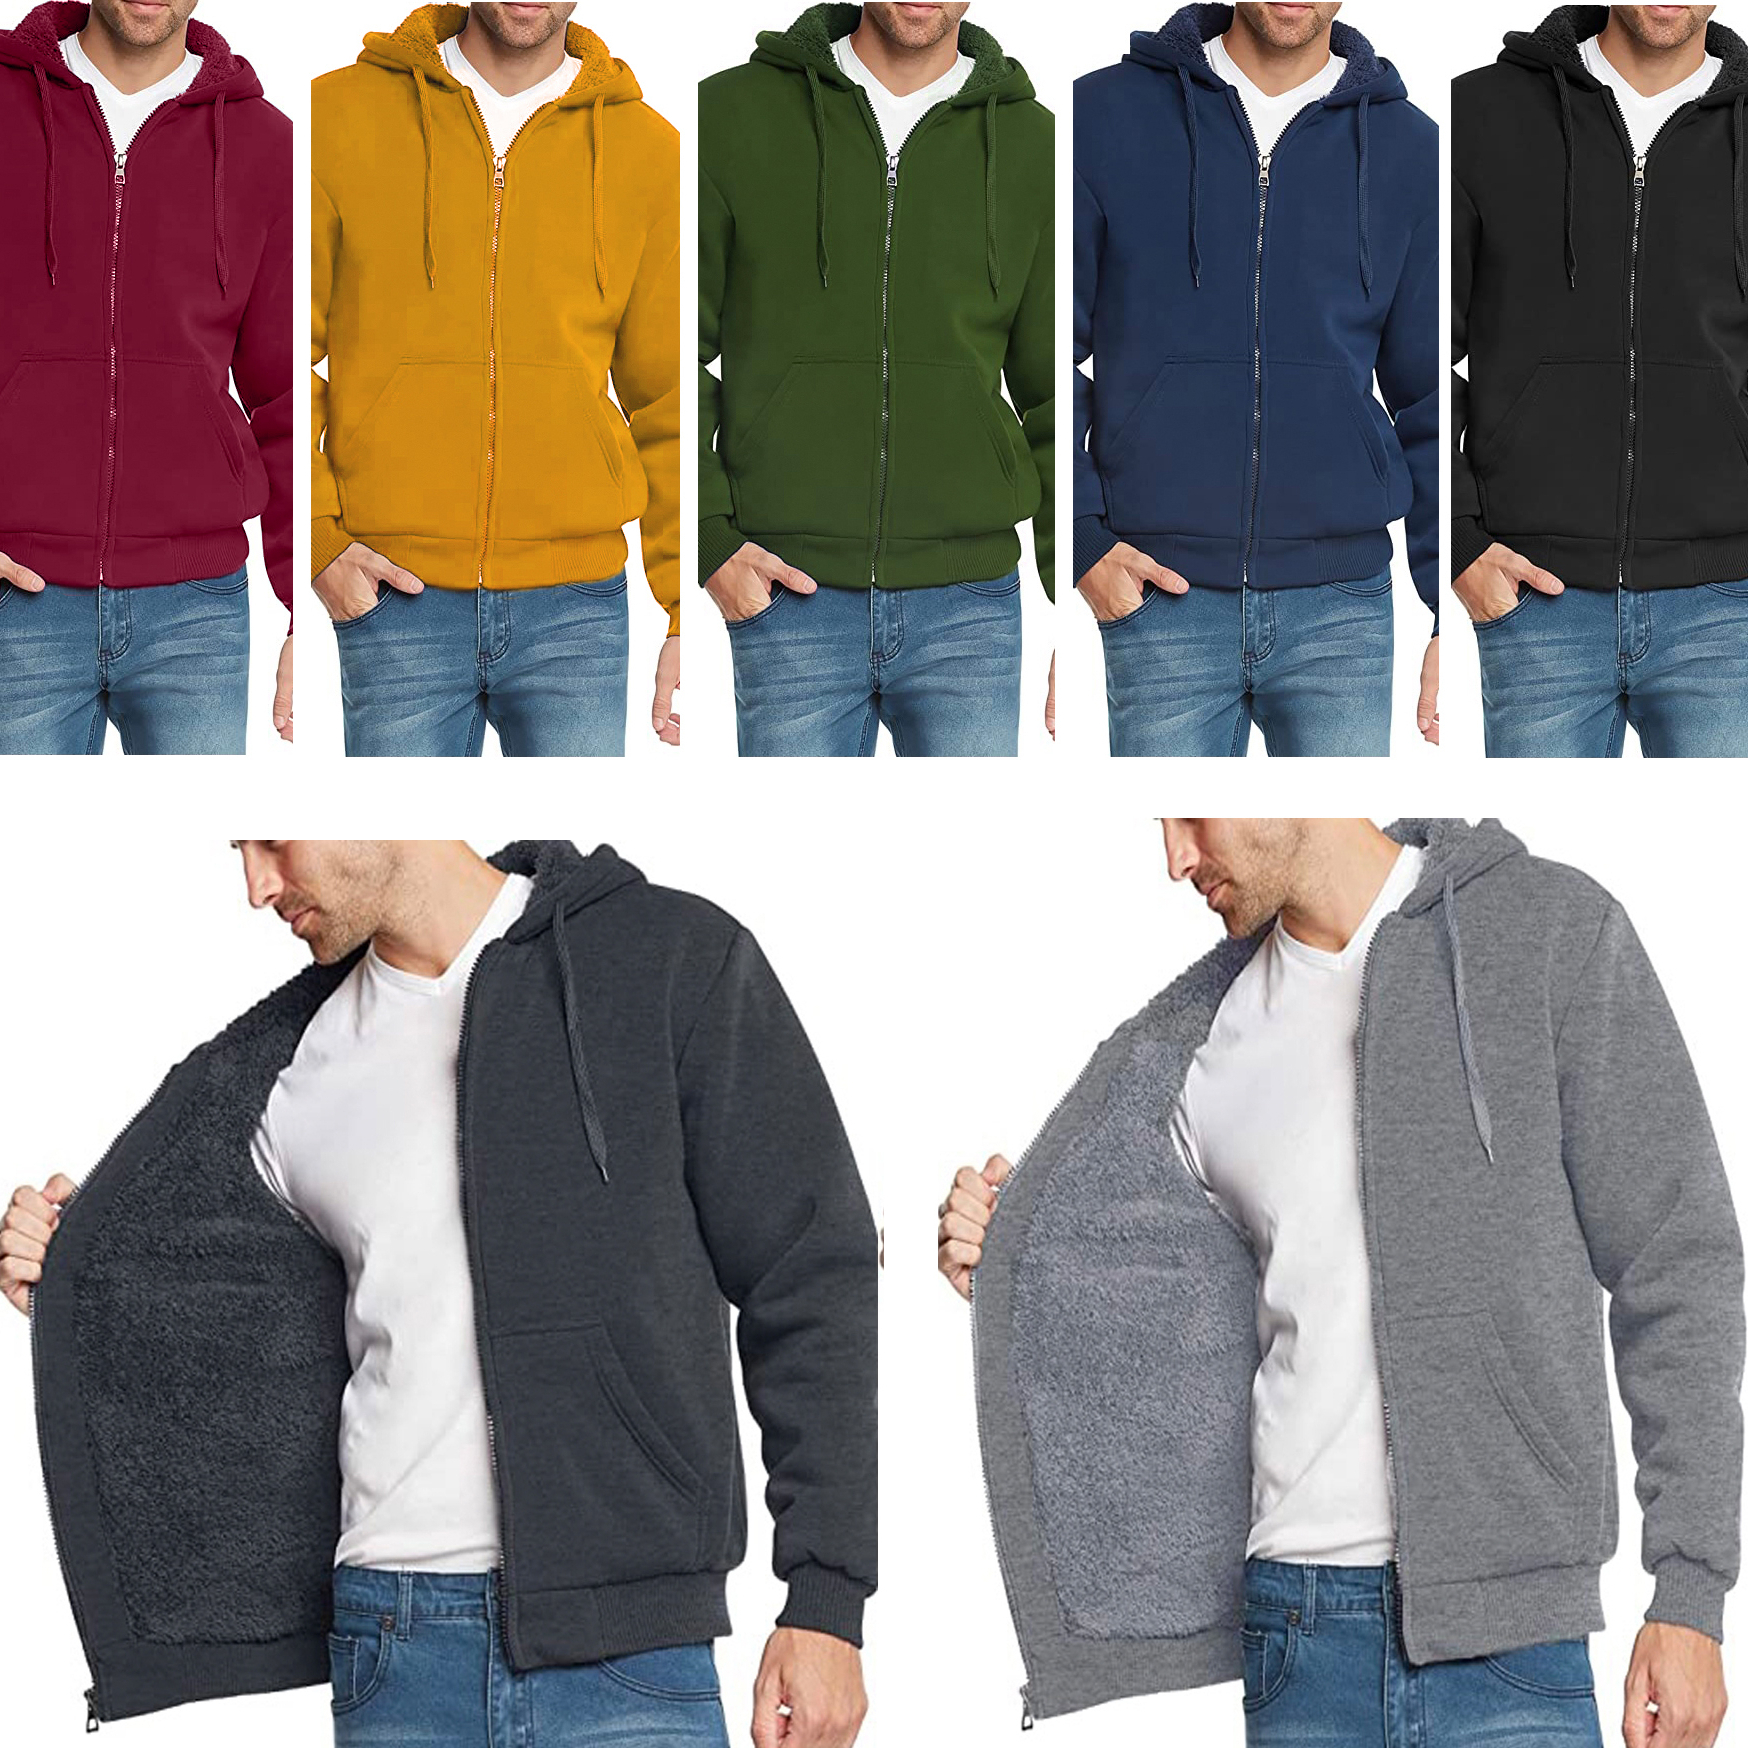 Men's Extra-Thick Sherpa Lined Fleece Hoodie (Big & Tall Sizes Available) - Navy, 3XL